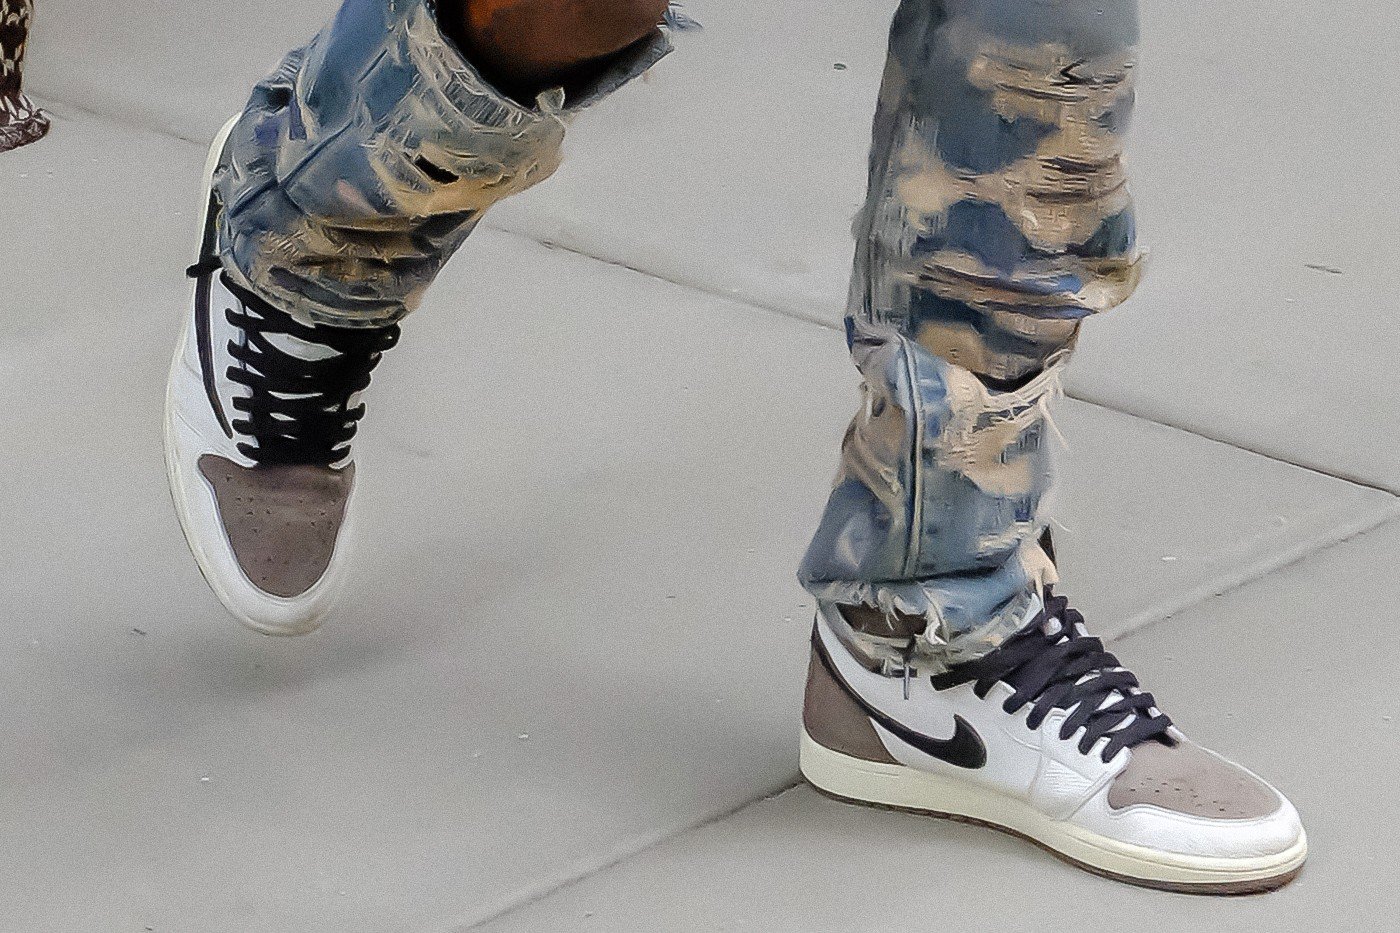 Spotted this guy wearing the Travis Scott AJ1's at a car show this